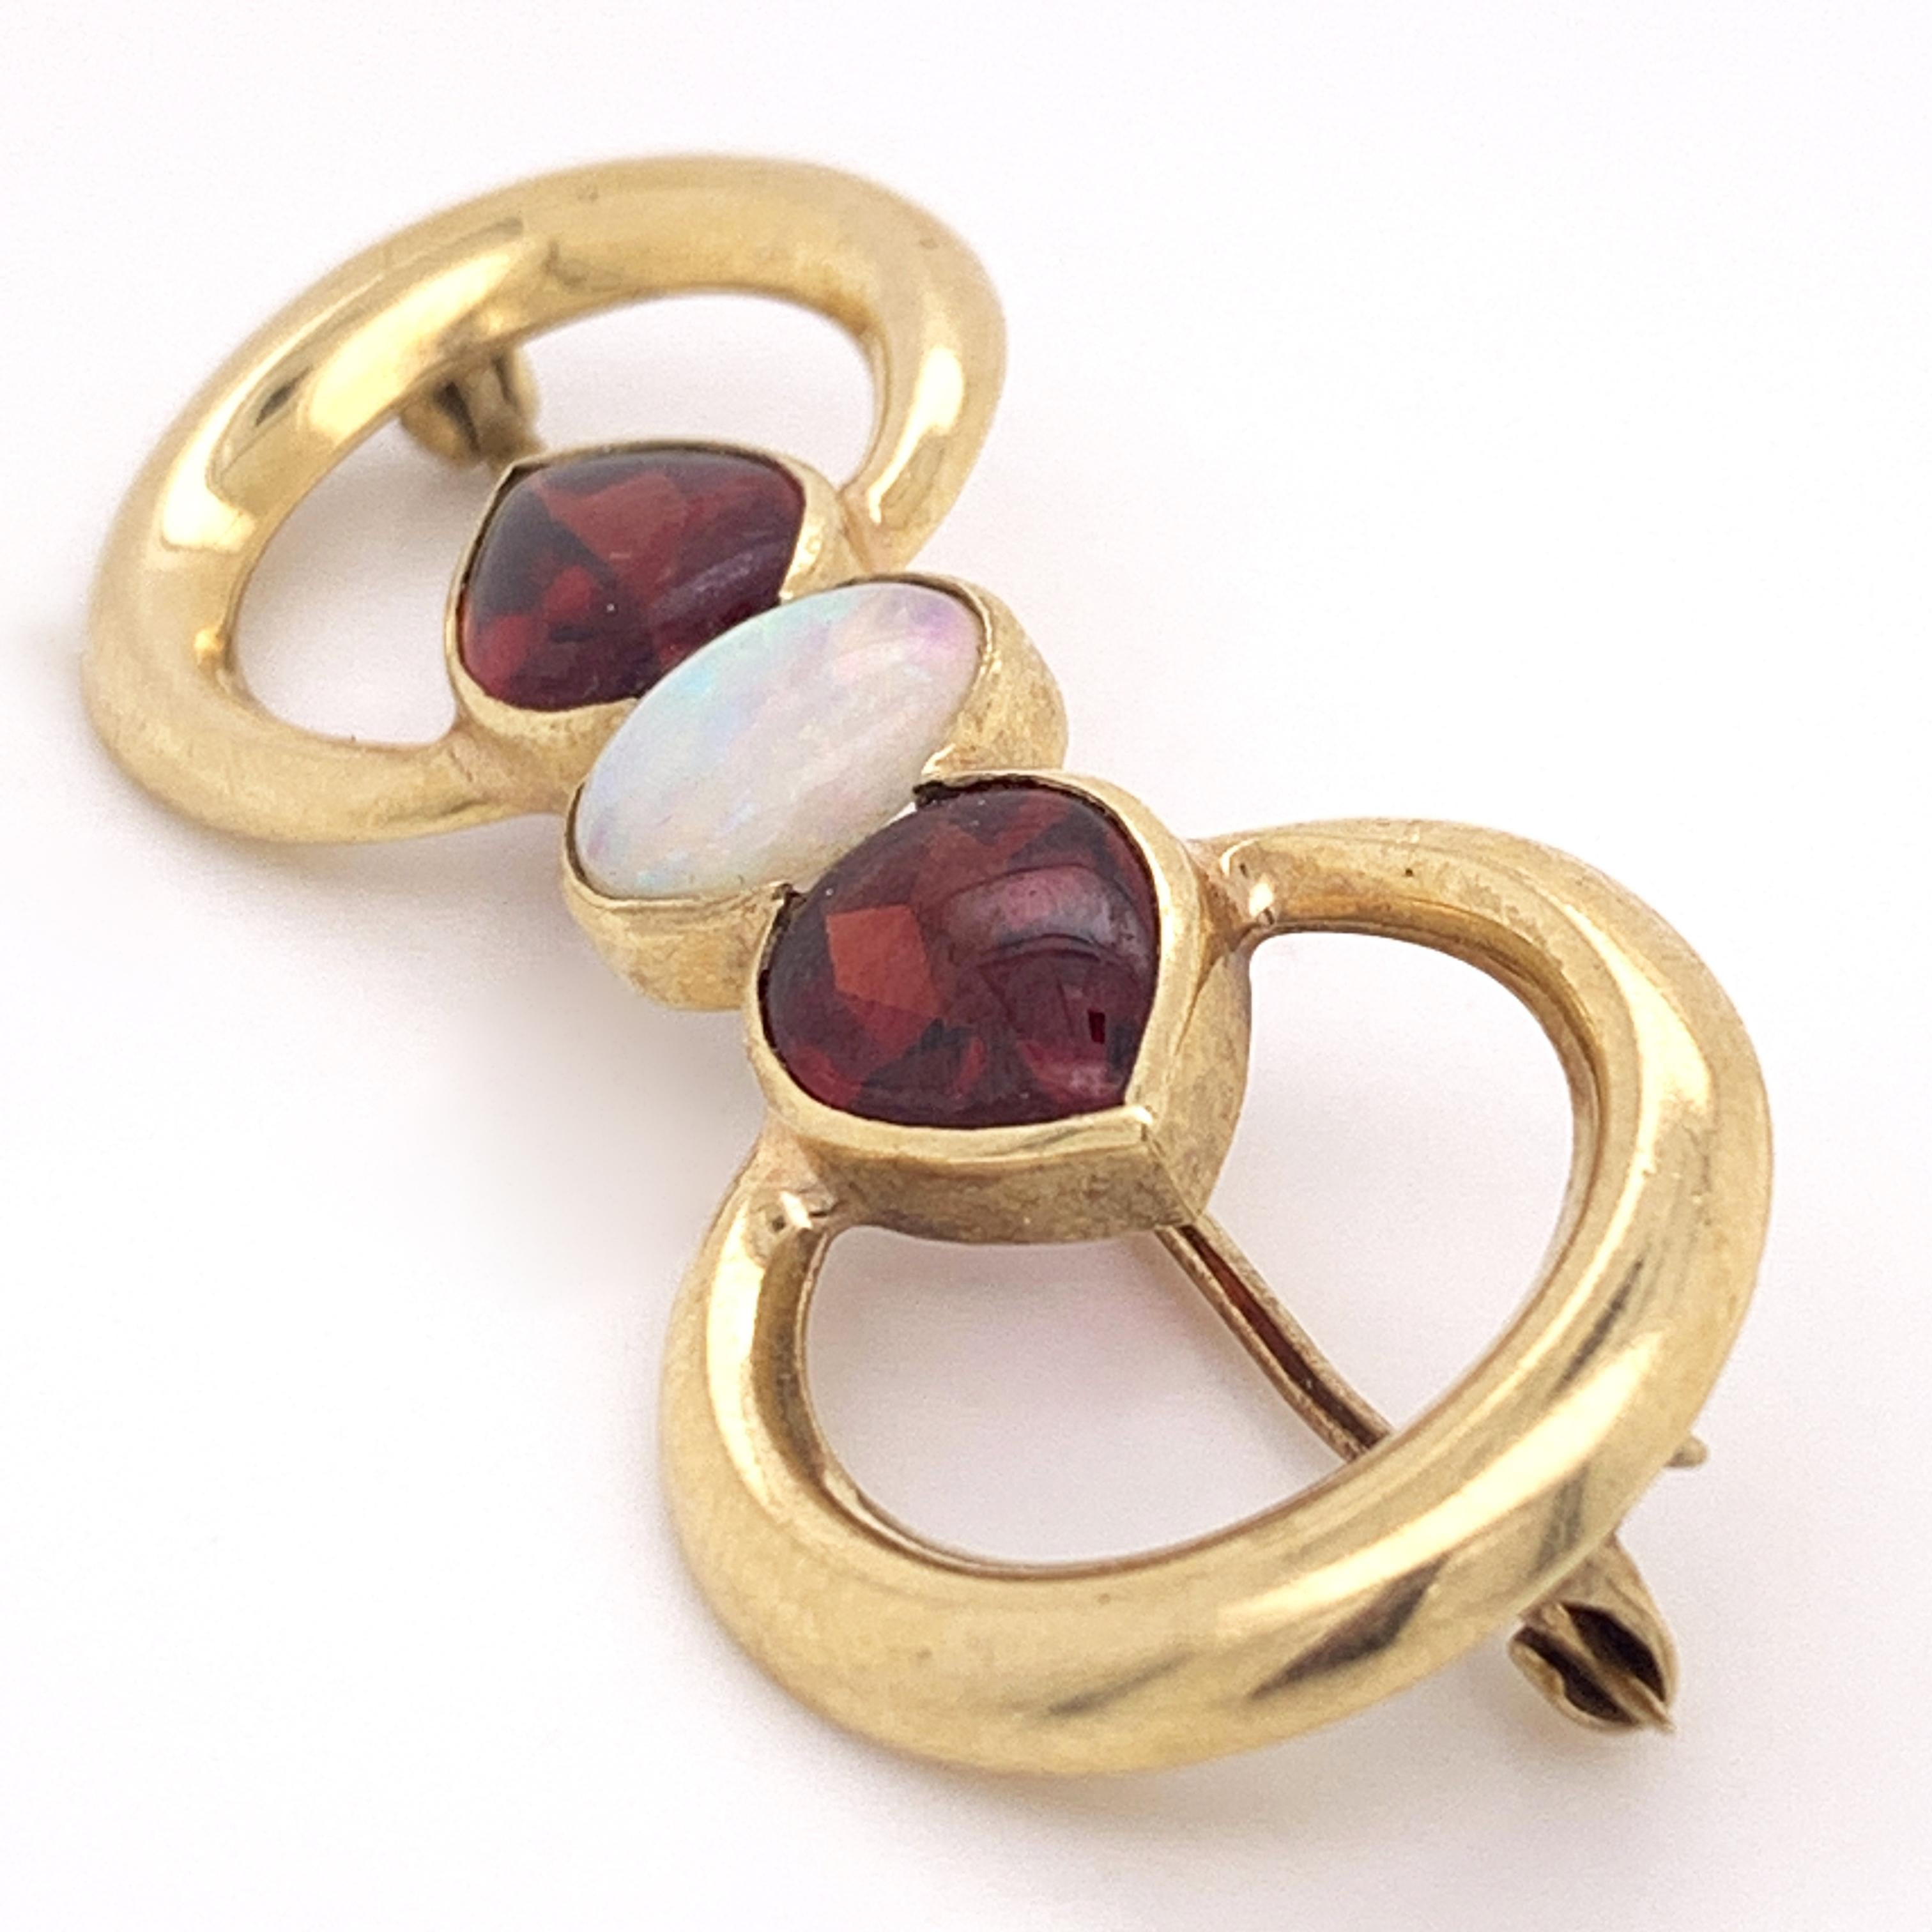 Artisan 18 Karat Yellow Gold Double Ring Brooch with Opal and Garnet Stones